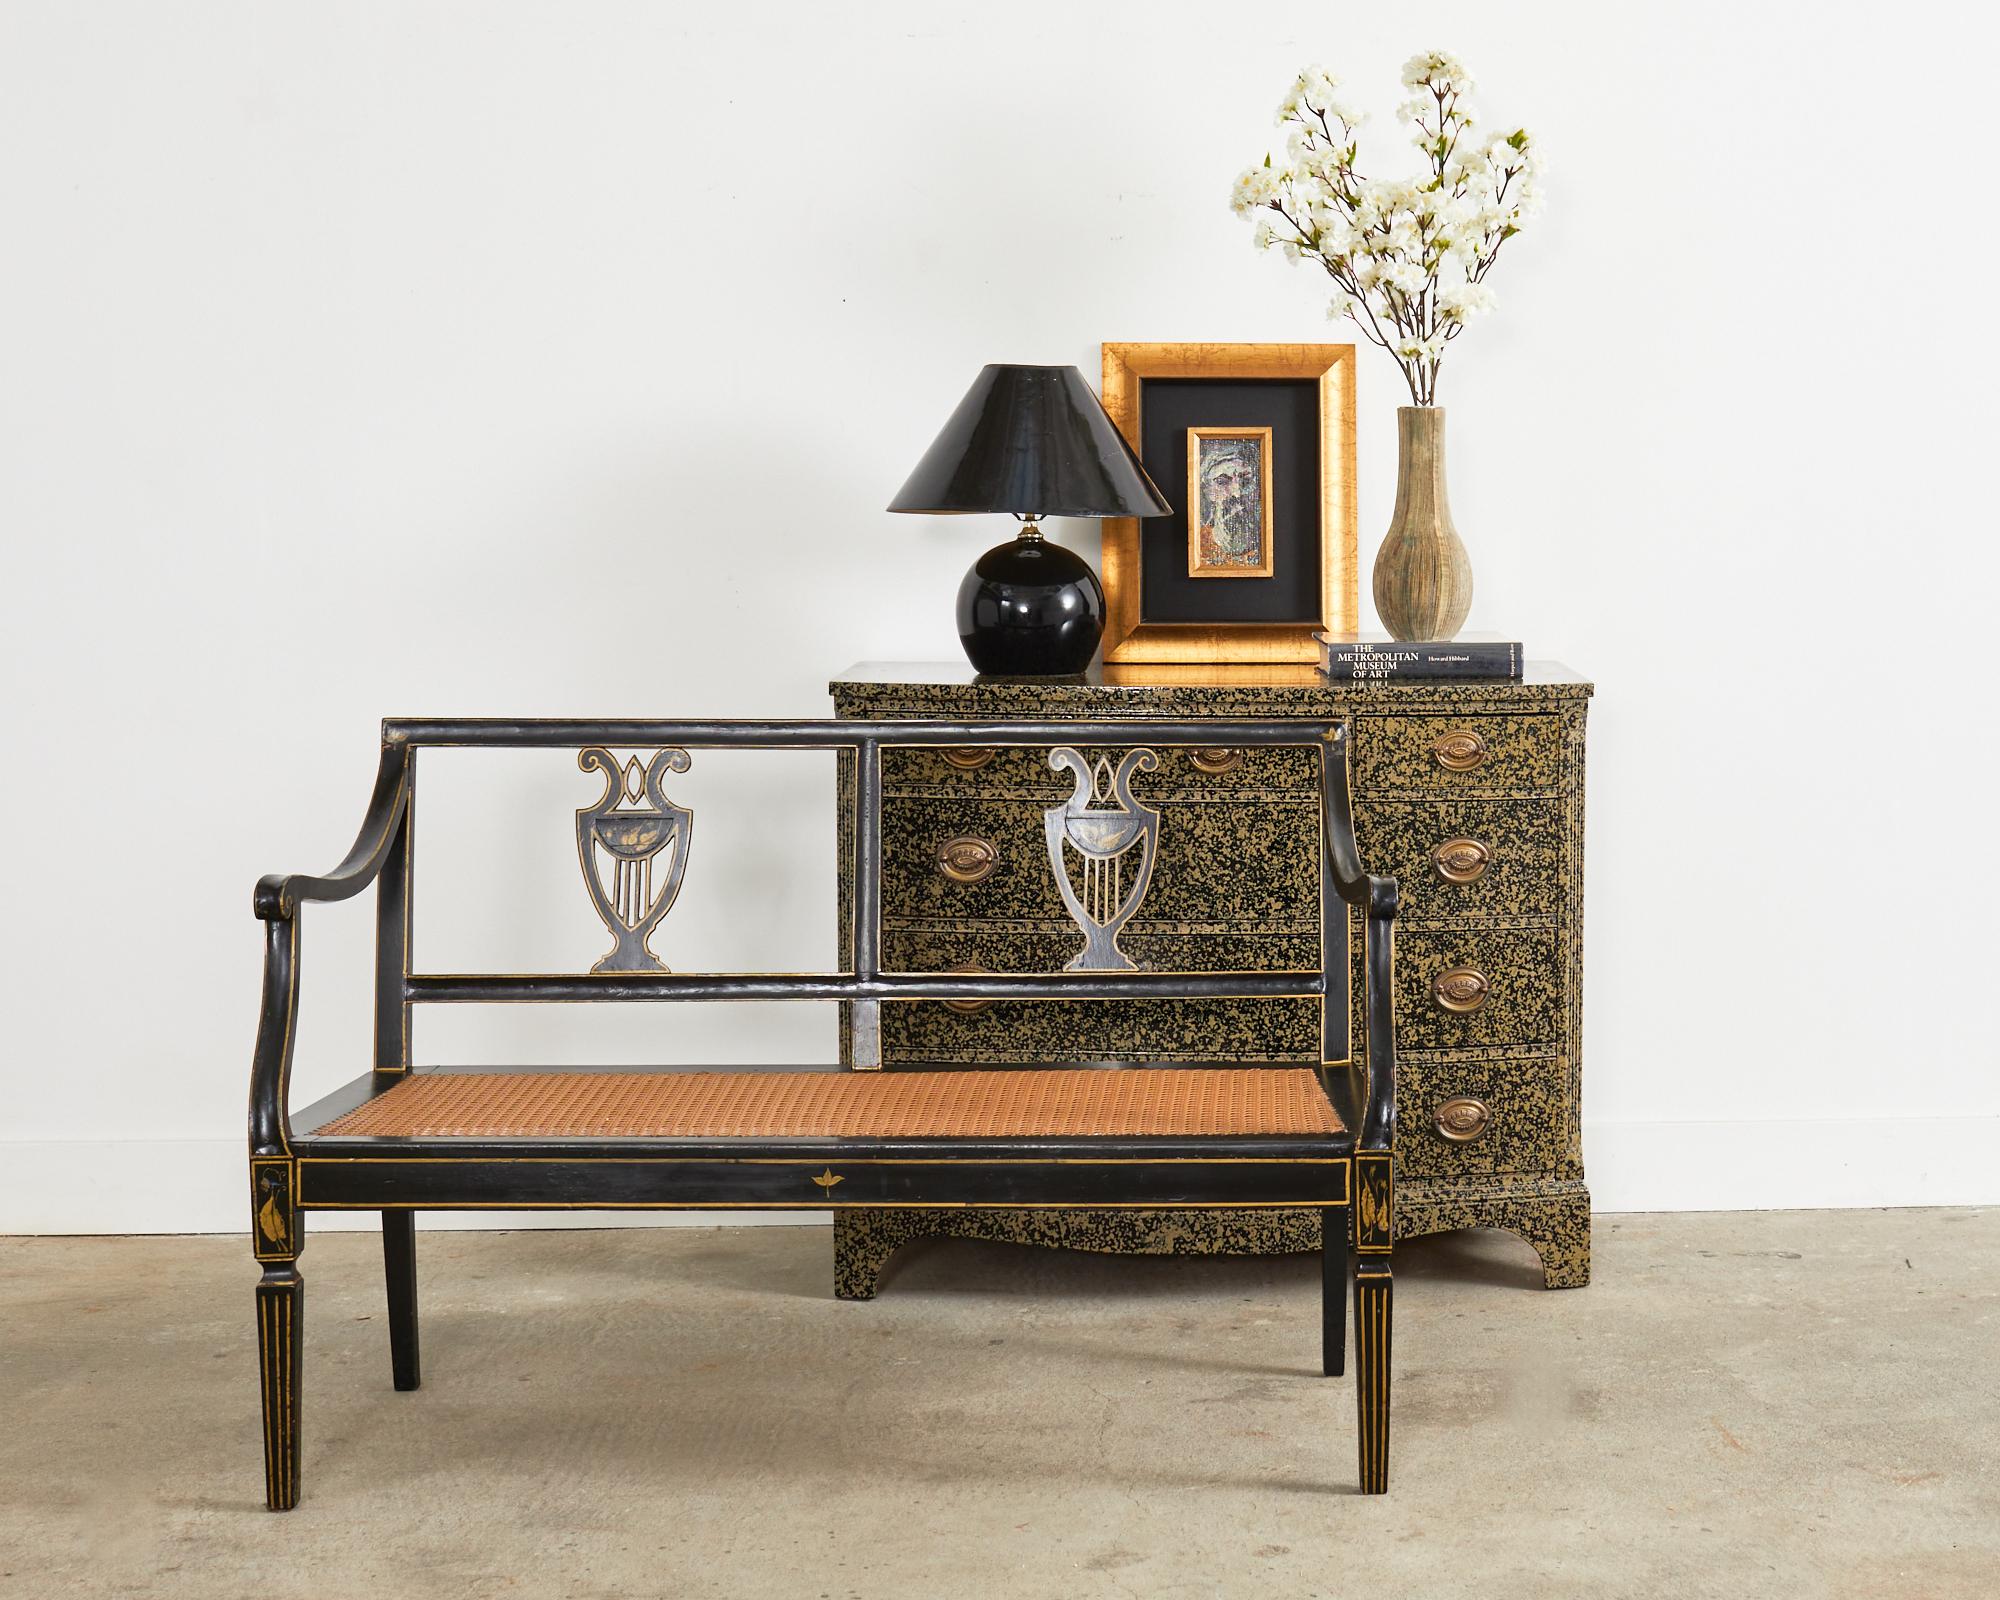 Dramatic 19th century Venetian style Italian bench seat or settee featuring a black lacquer painted finish with parcel gilt accents. The elegant frame of the bench is carved with gracefully curved arms and arm supports. The back splat has a lyre